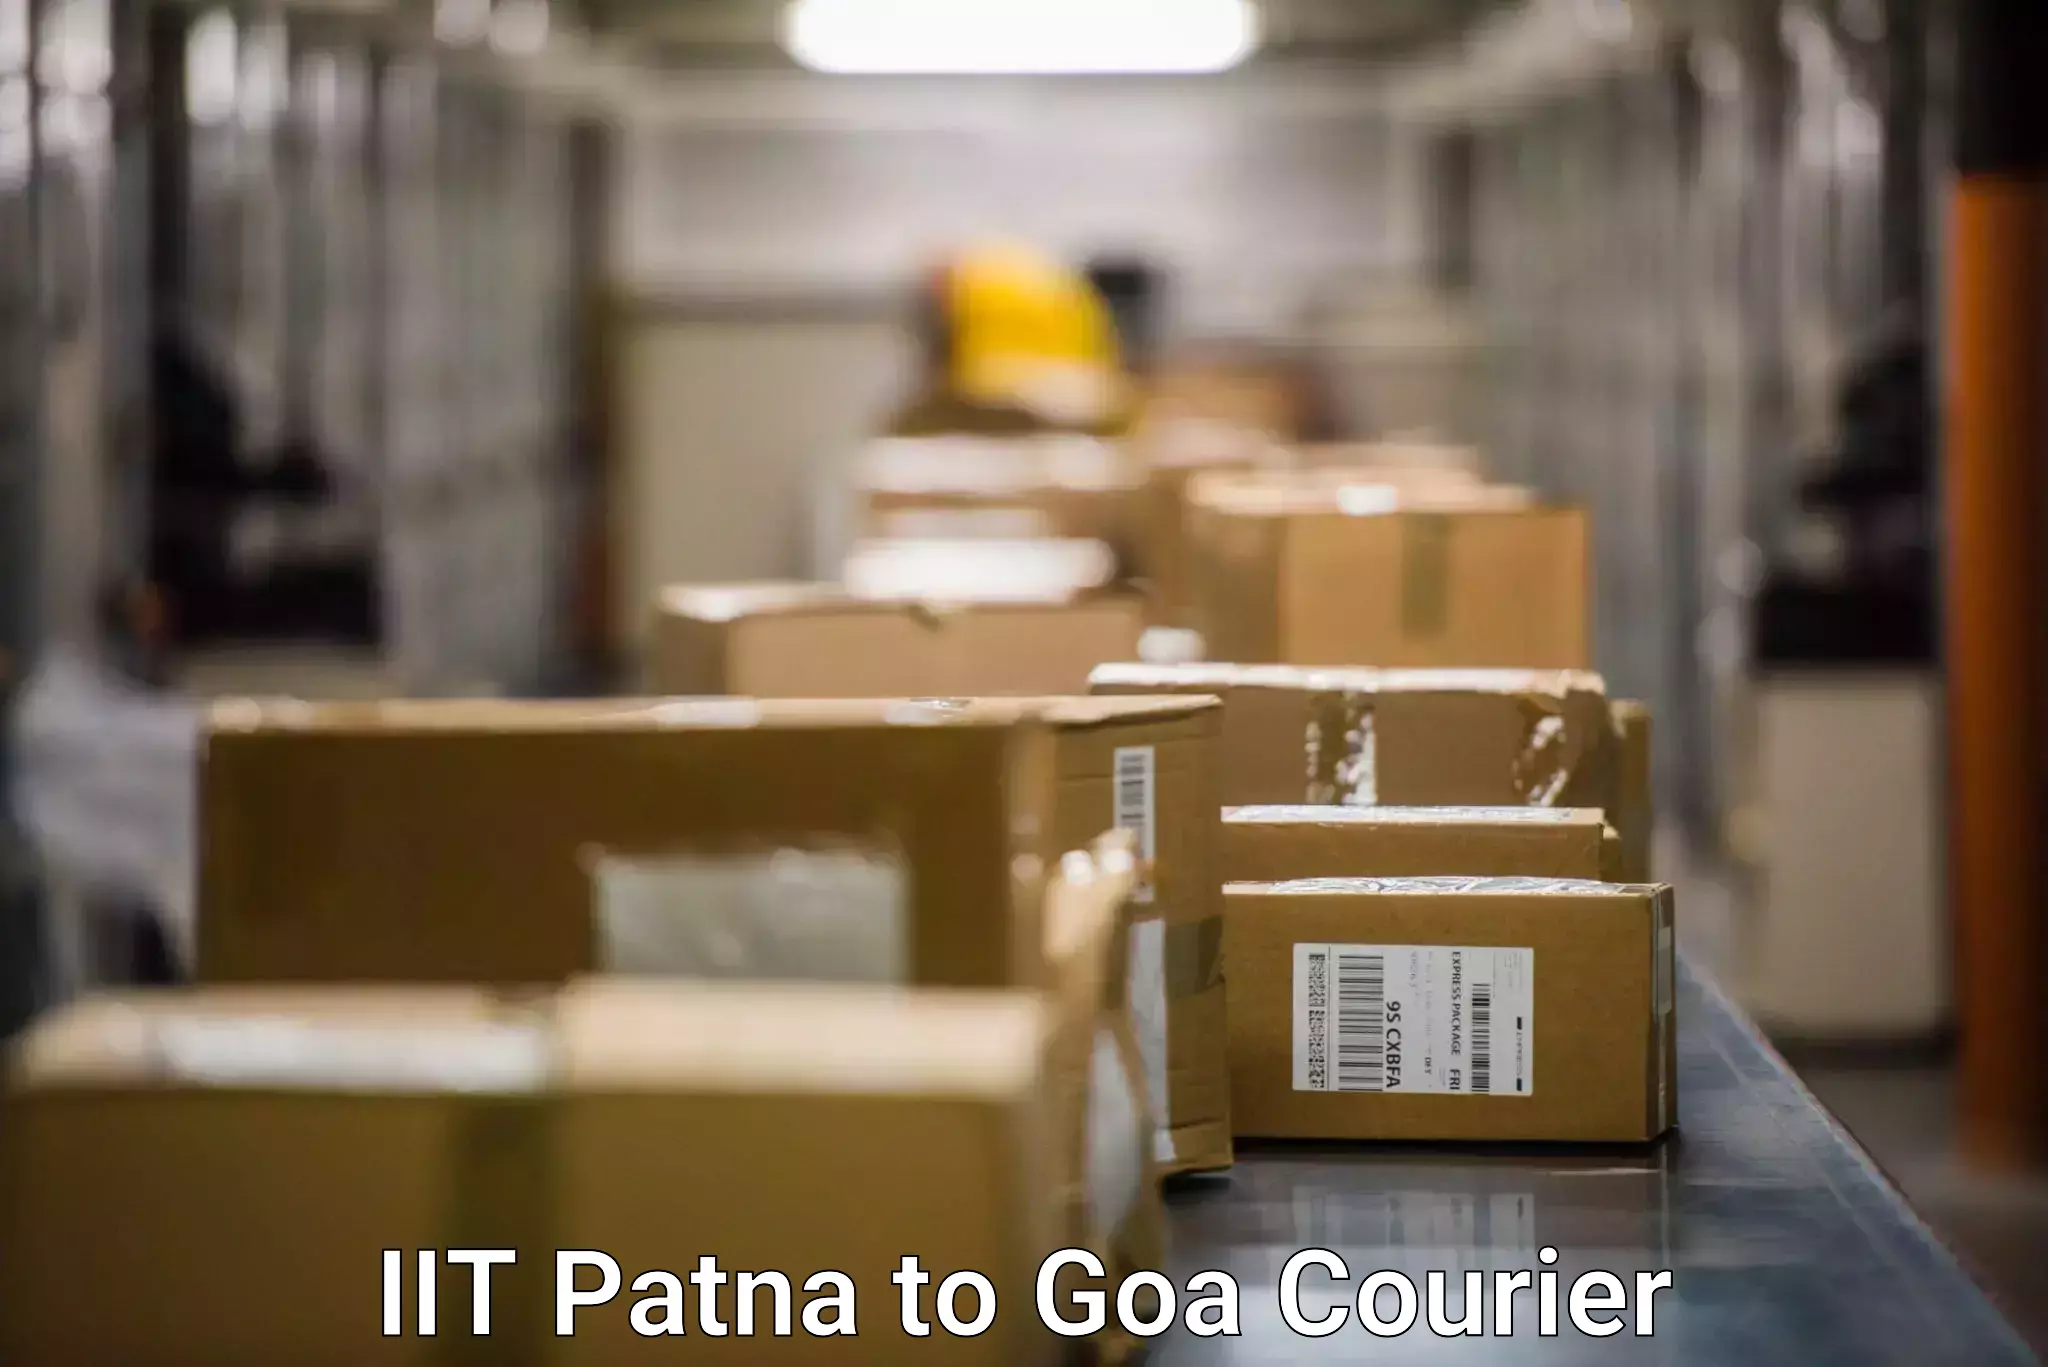 Large package courier IIT Patna to Goa University